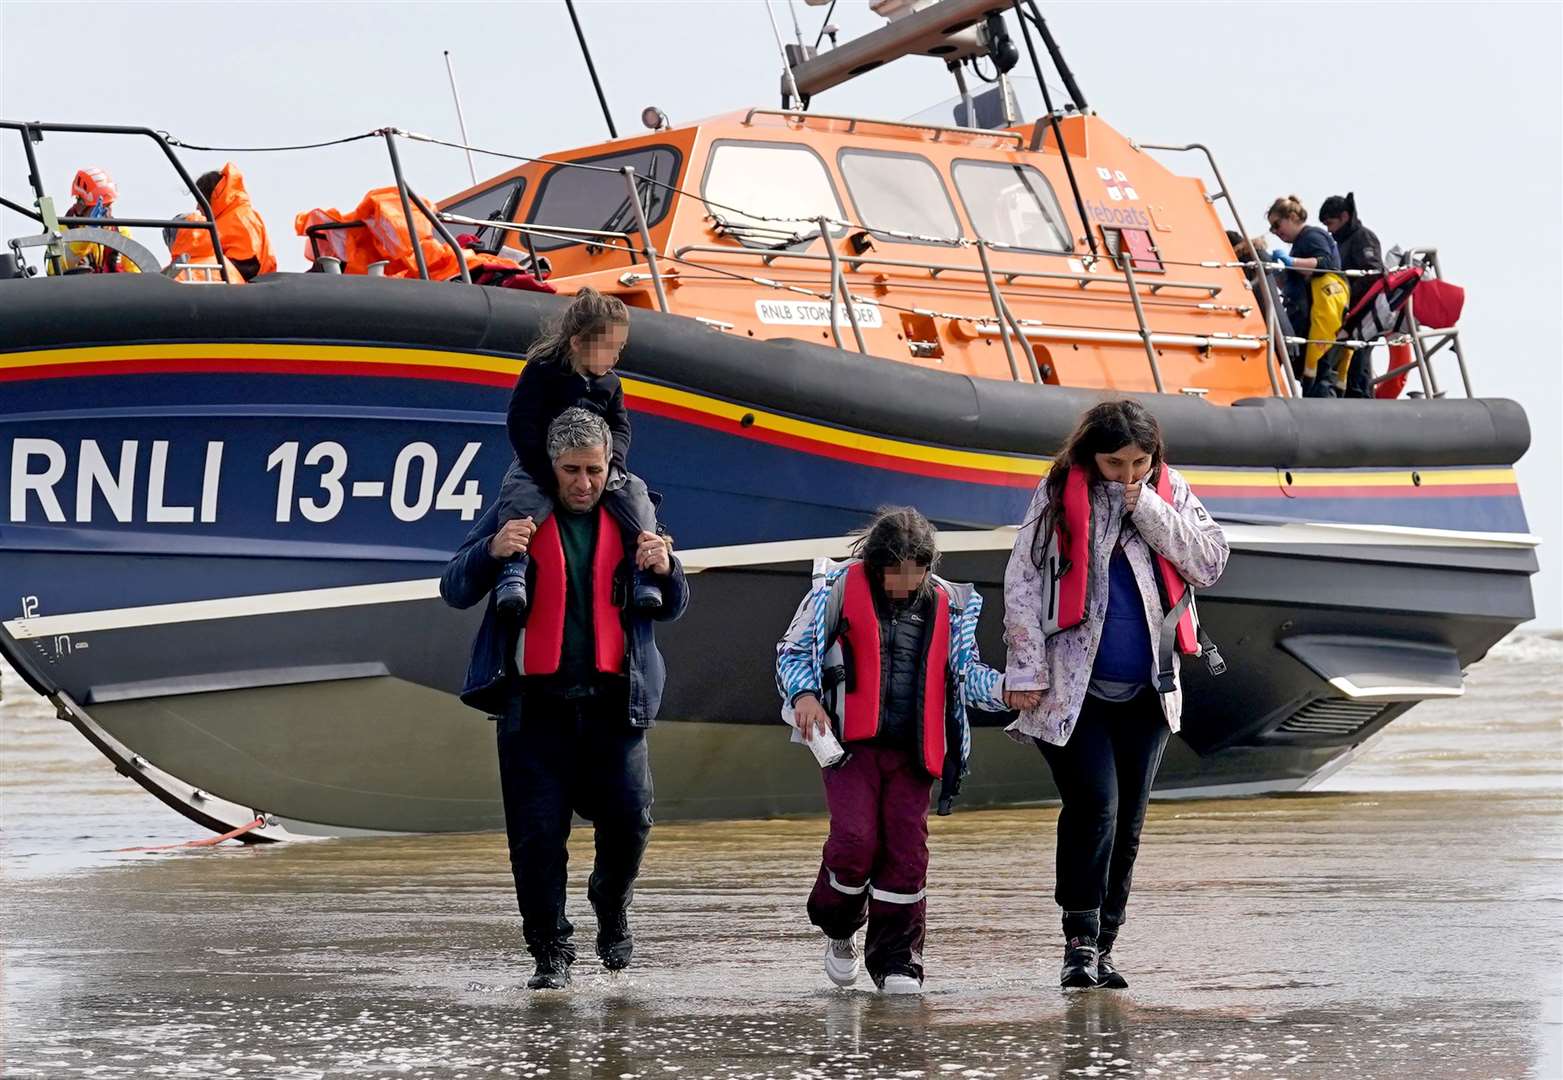 More than 100,000 migrants have crossed the Channel to the UK in the last five years (Gareth Fuller/PA)